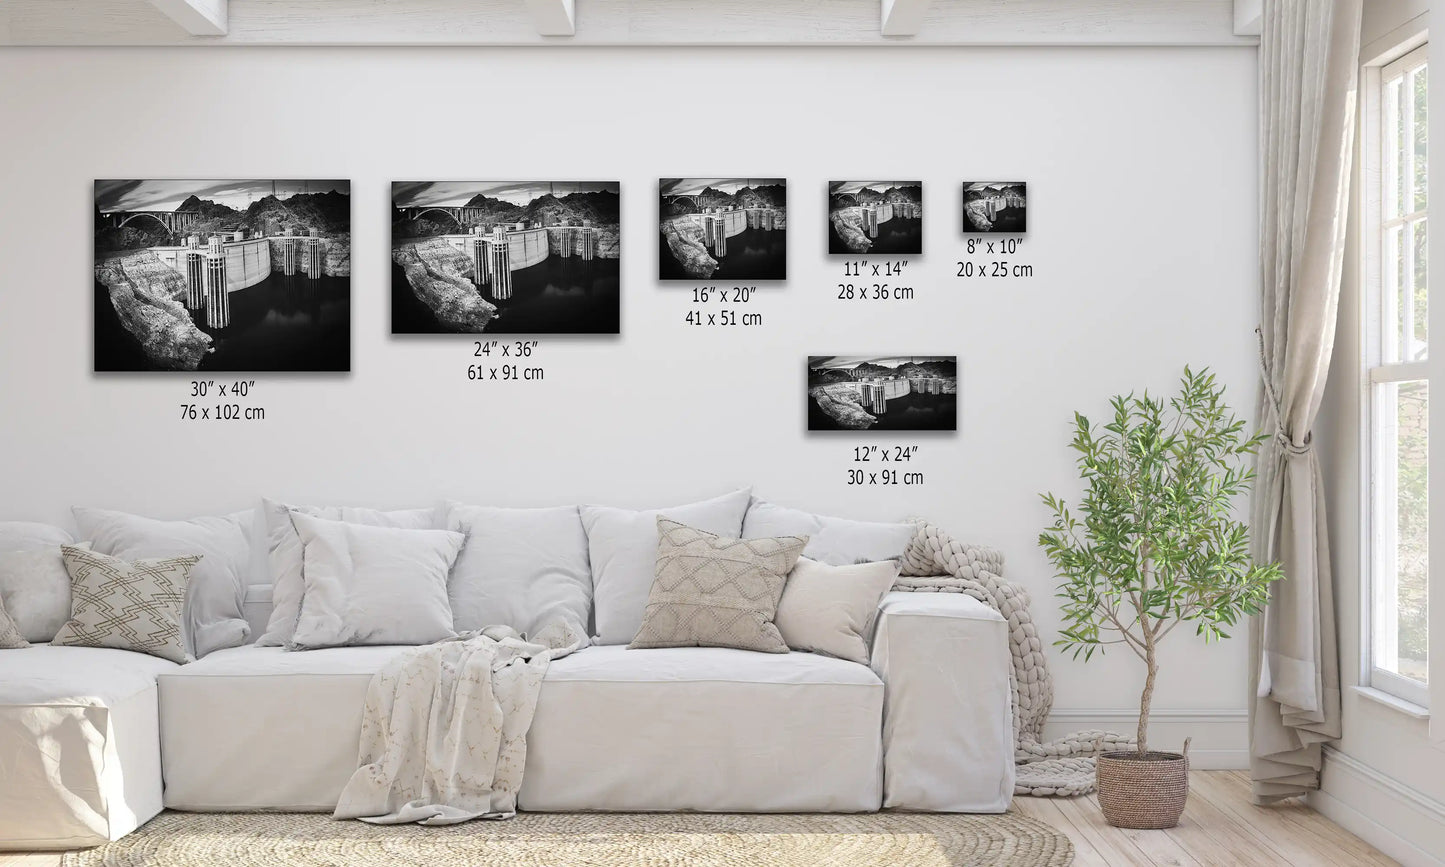 Hoover Dam in black and white, showcased in various canvas sizes on a living room wall, illustrating scale and perspective.